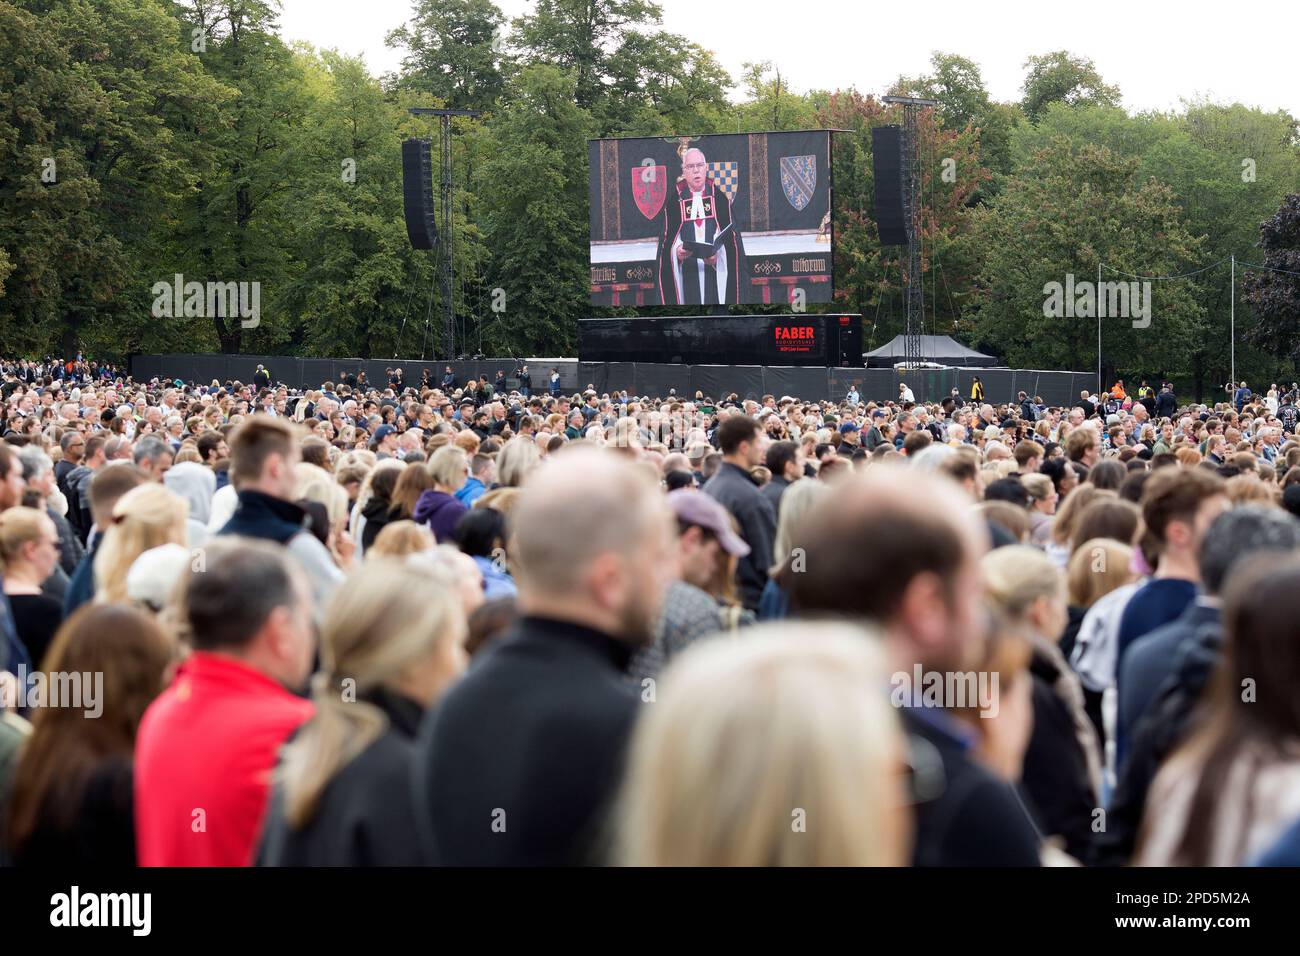 People watch the TV coverage of the late Queen Elizabeth II’s funeral day on a large screen in Hyde Park, London. Stock Photo